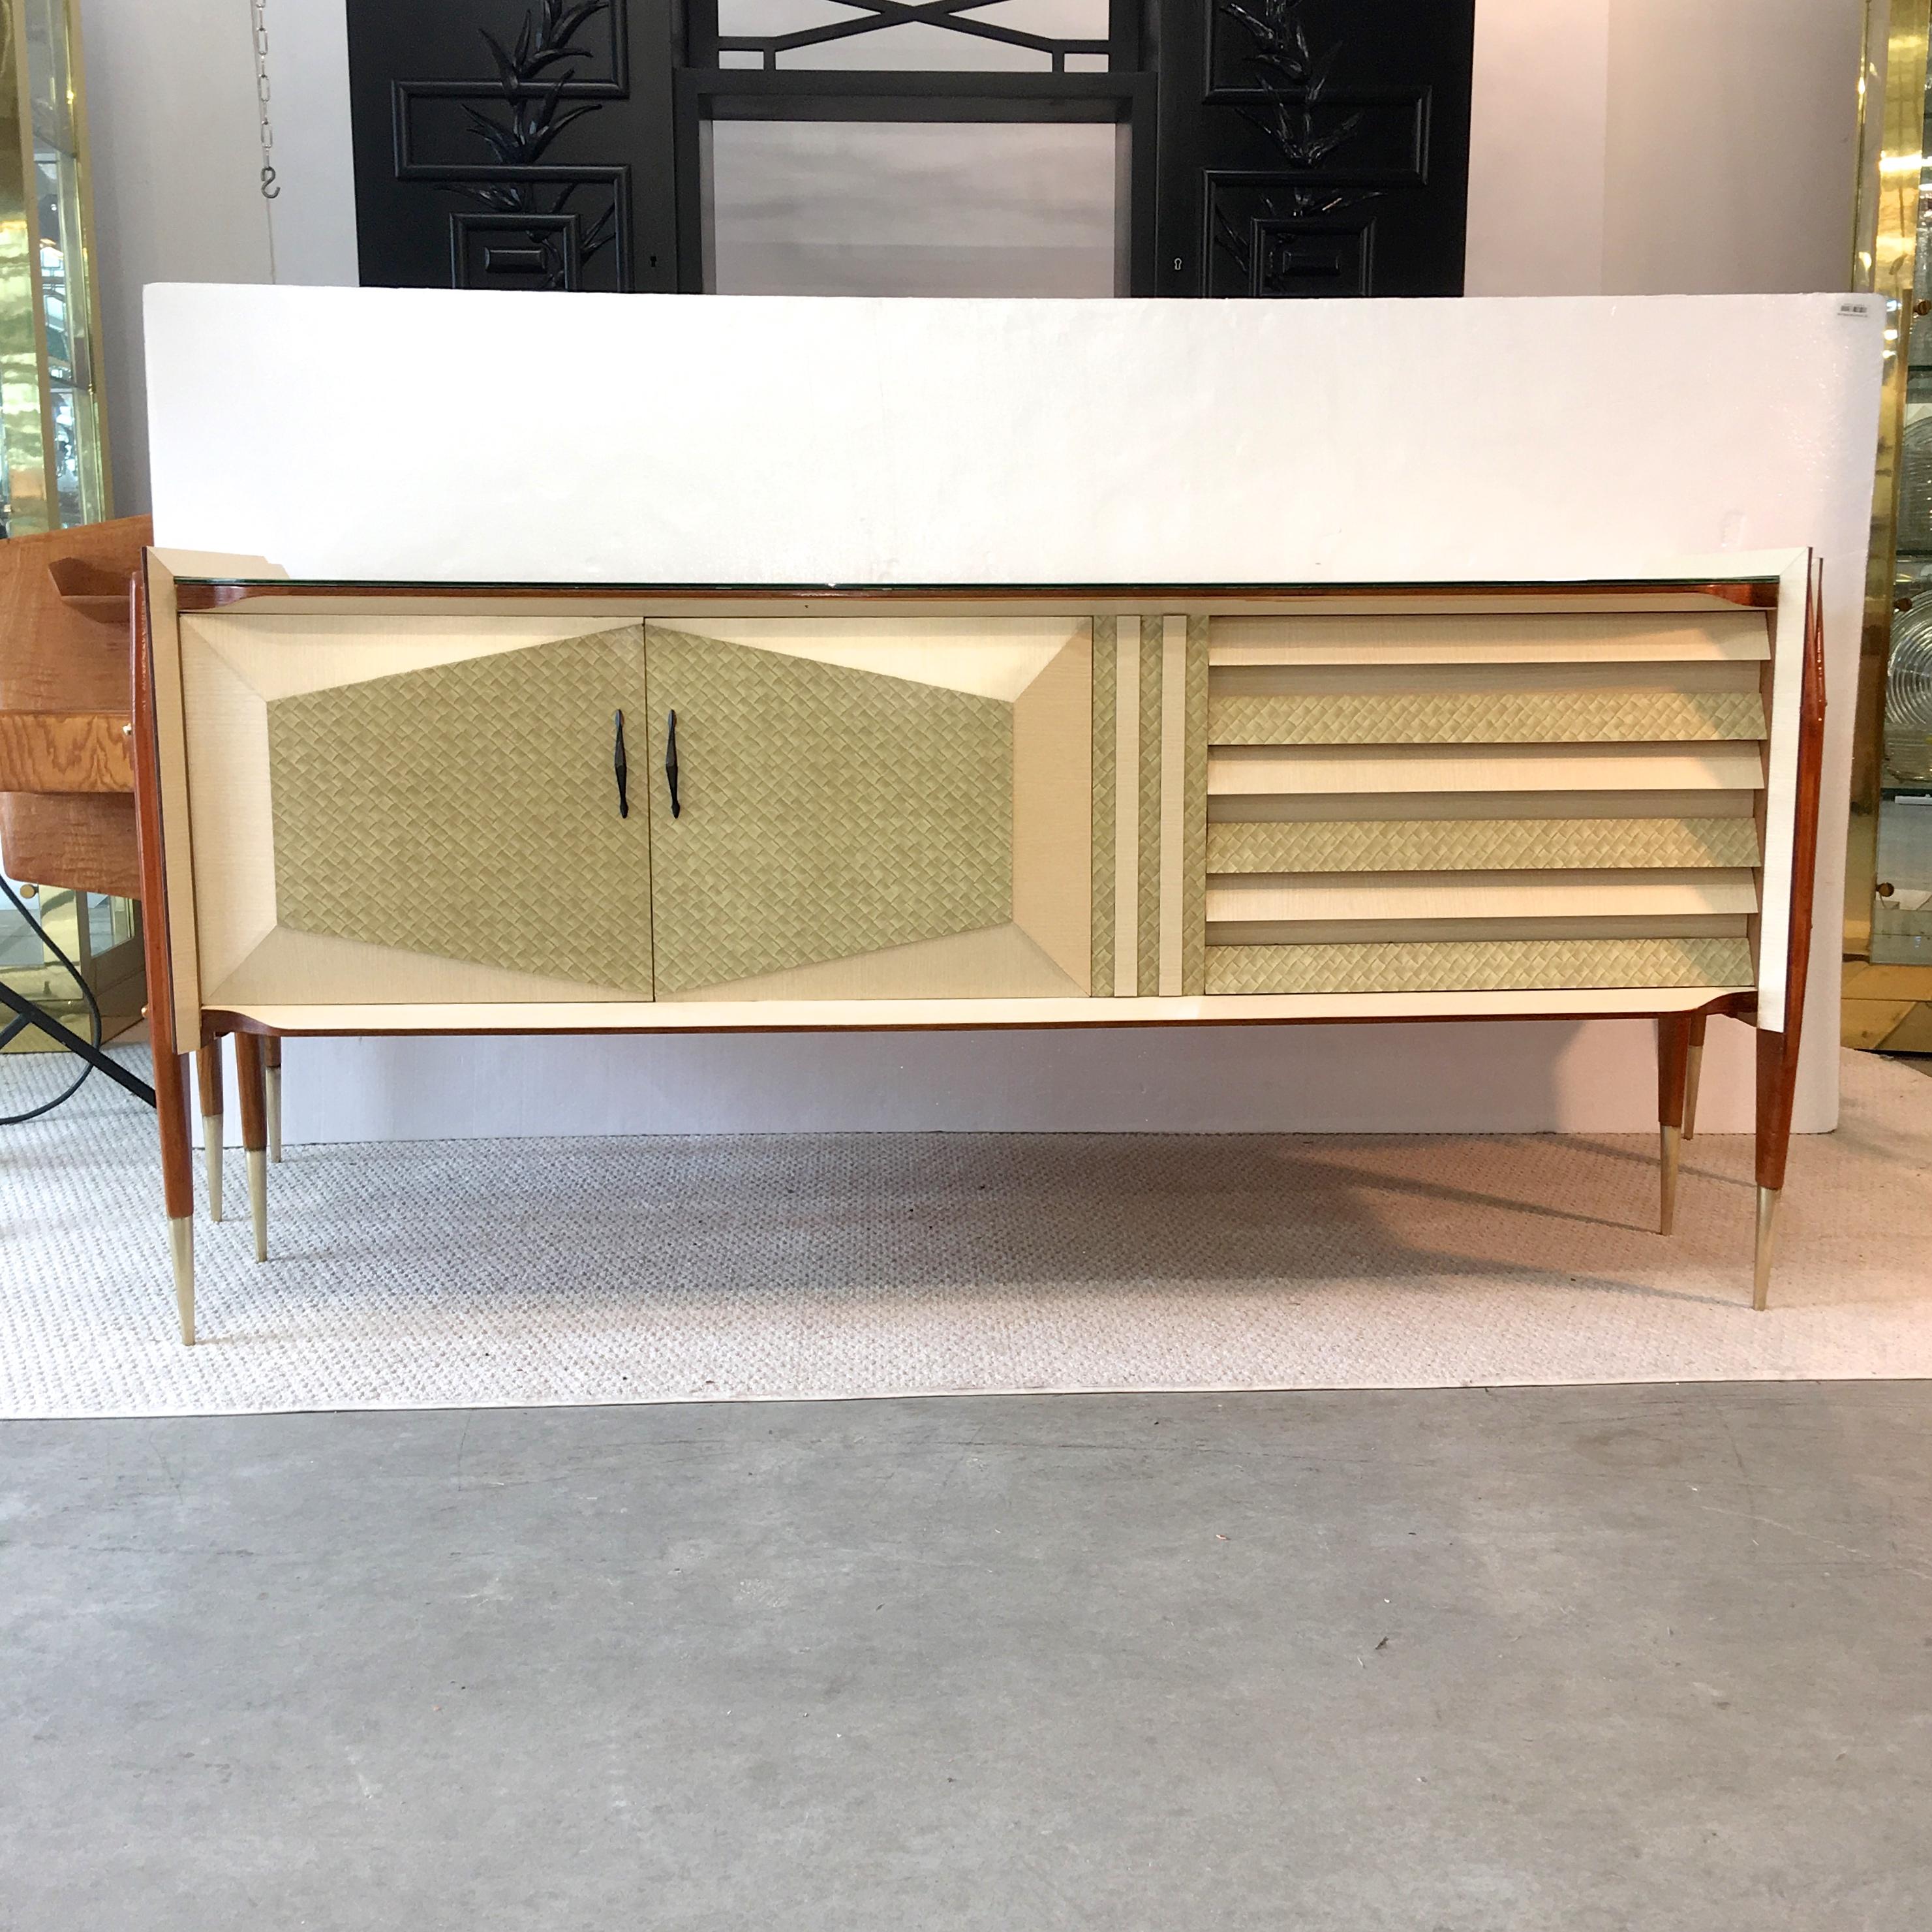 Incredible unicorn! Rare 1950s Italian sideboard with reverse painted marbleized glass top case with geometric faceted door panels and drawer fronts floating suspended by four exoskeletal wood legs with solid brass standoffs, acorn nuts and tapered